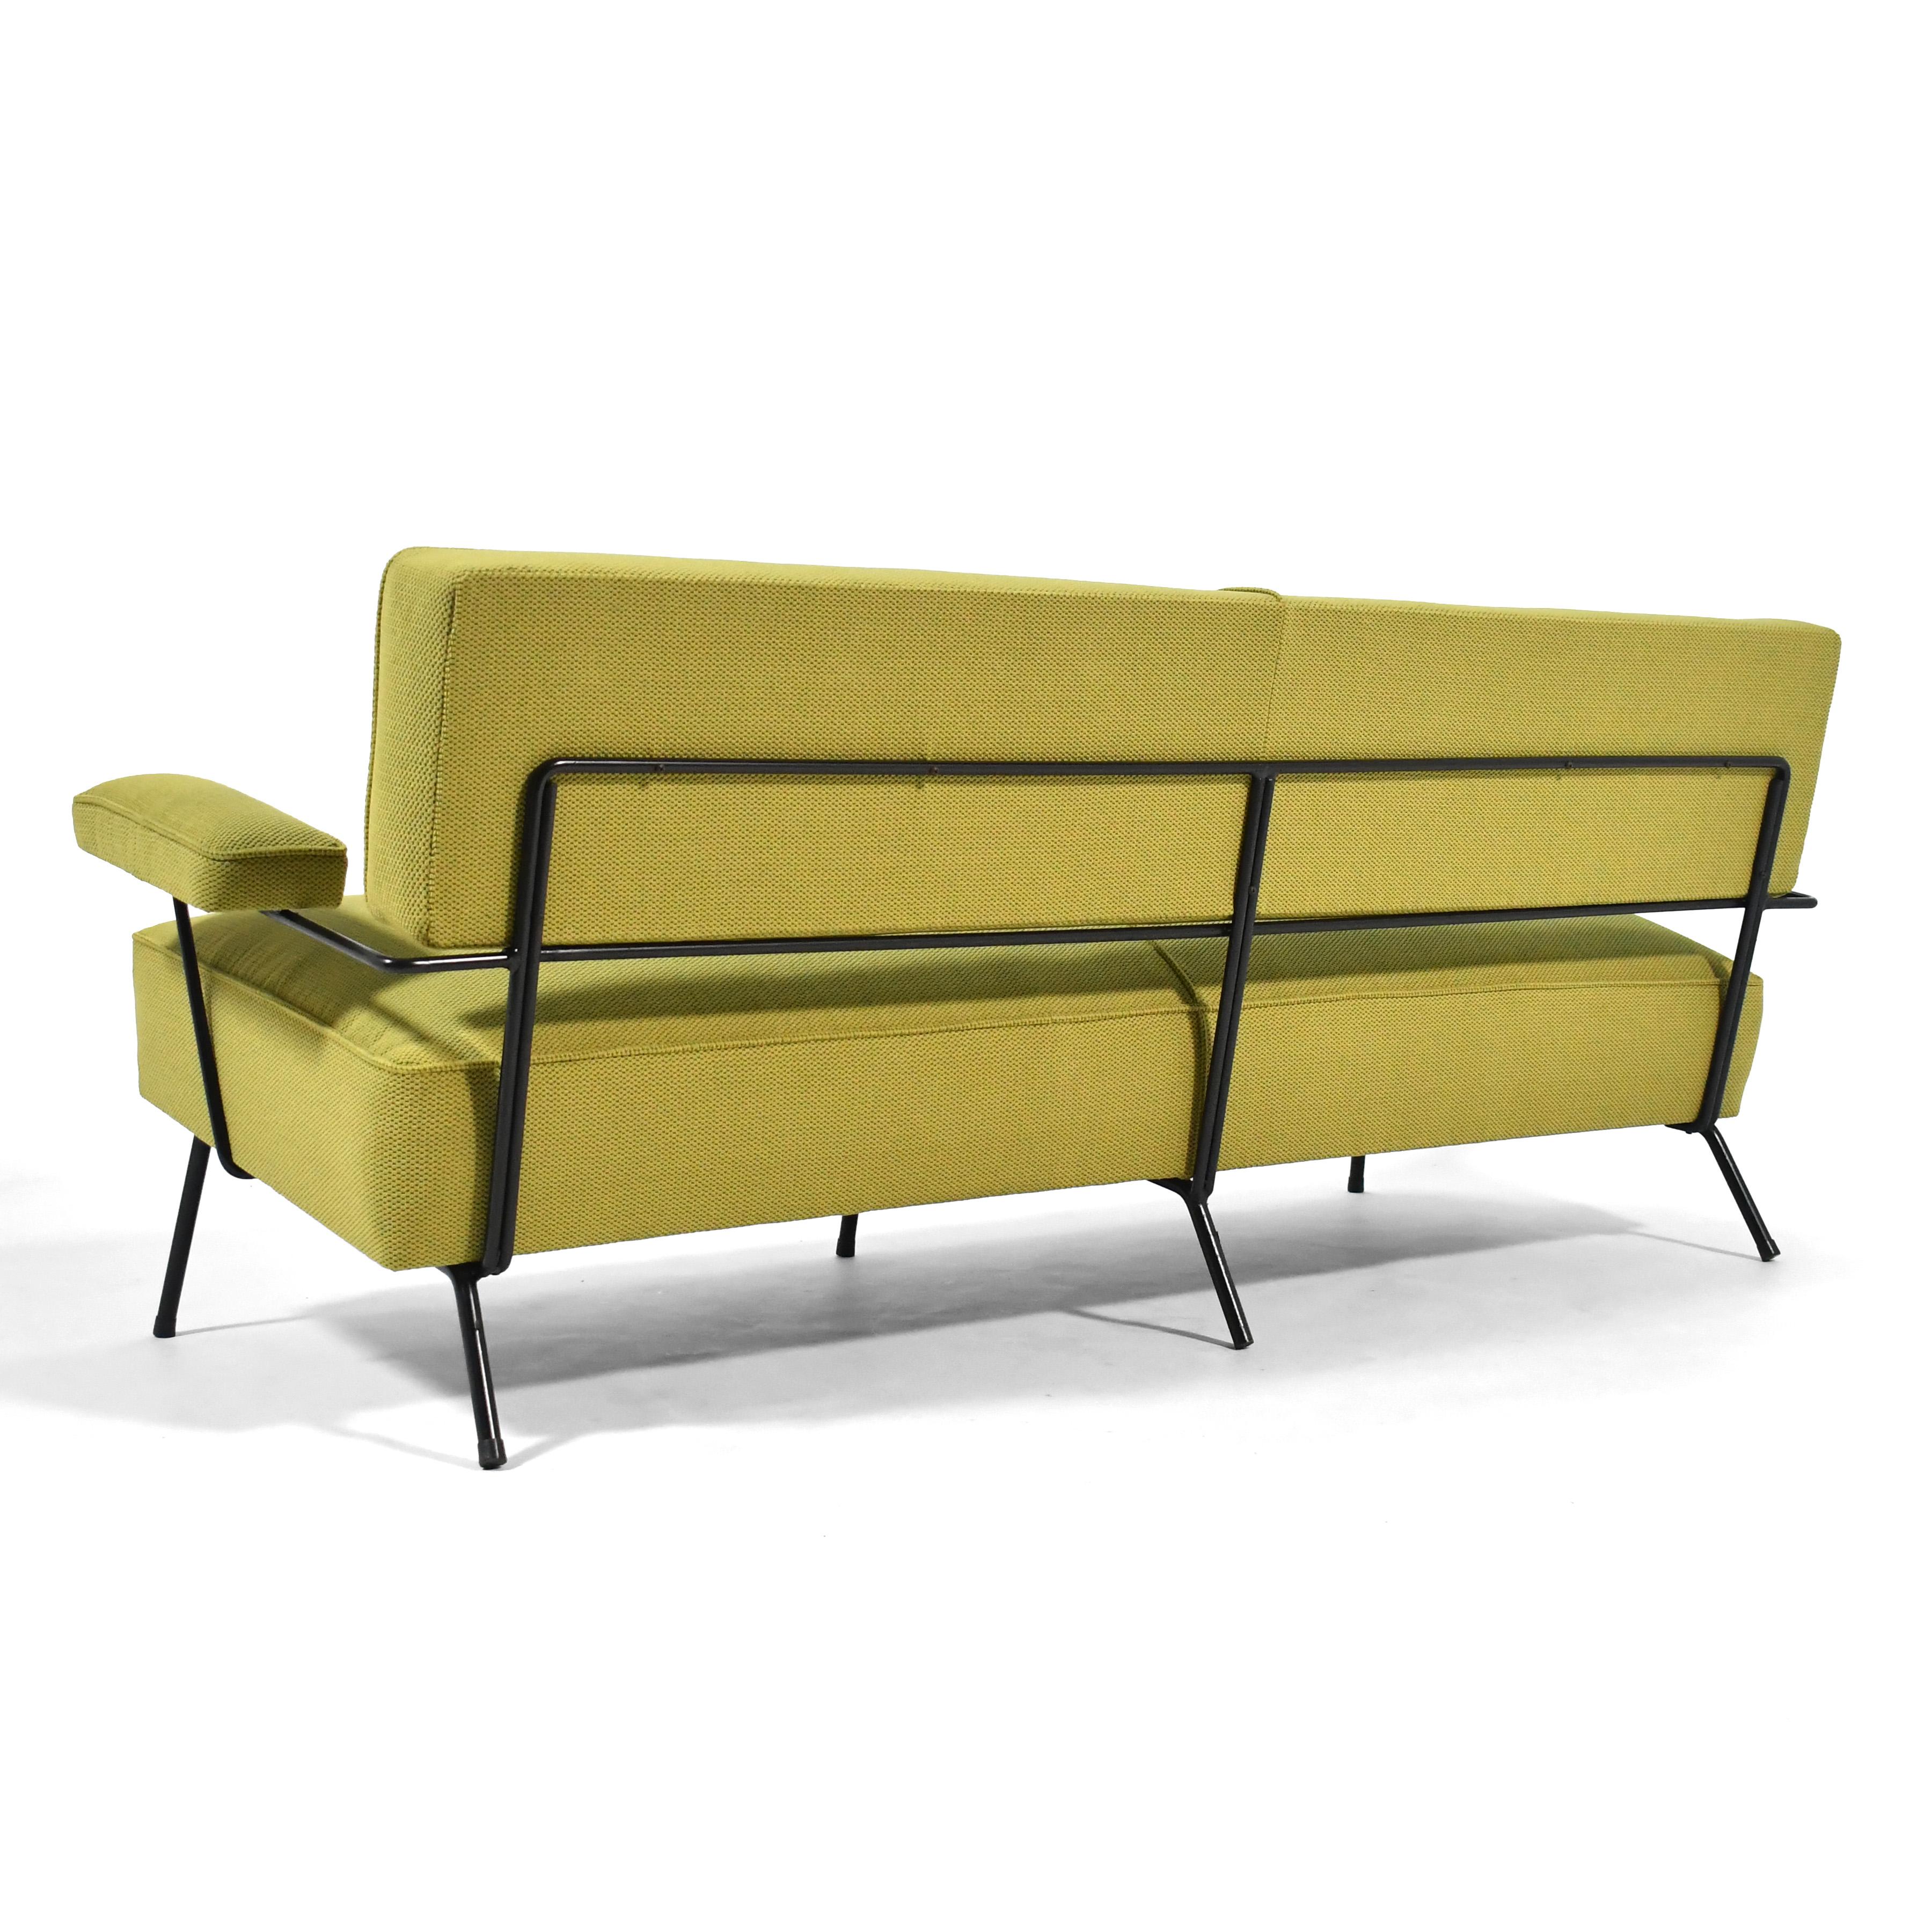 Mid-20th Century Sofa with Iron Frame Attributed to William Armbruster For Sale